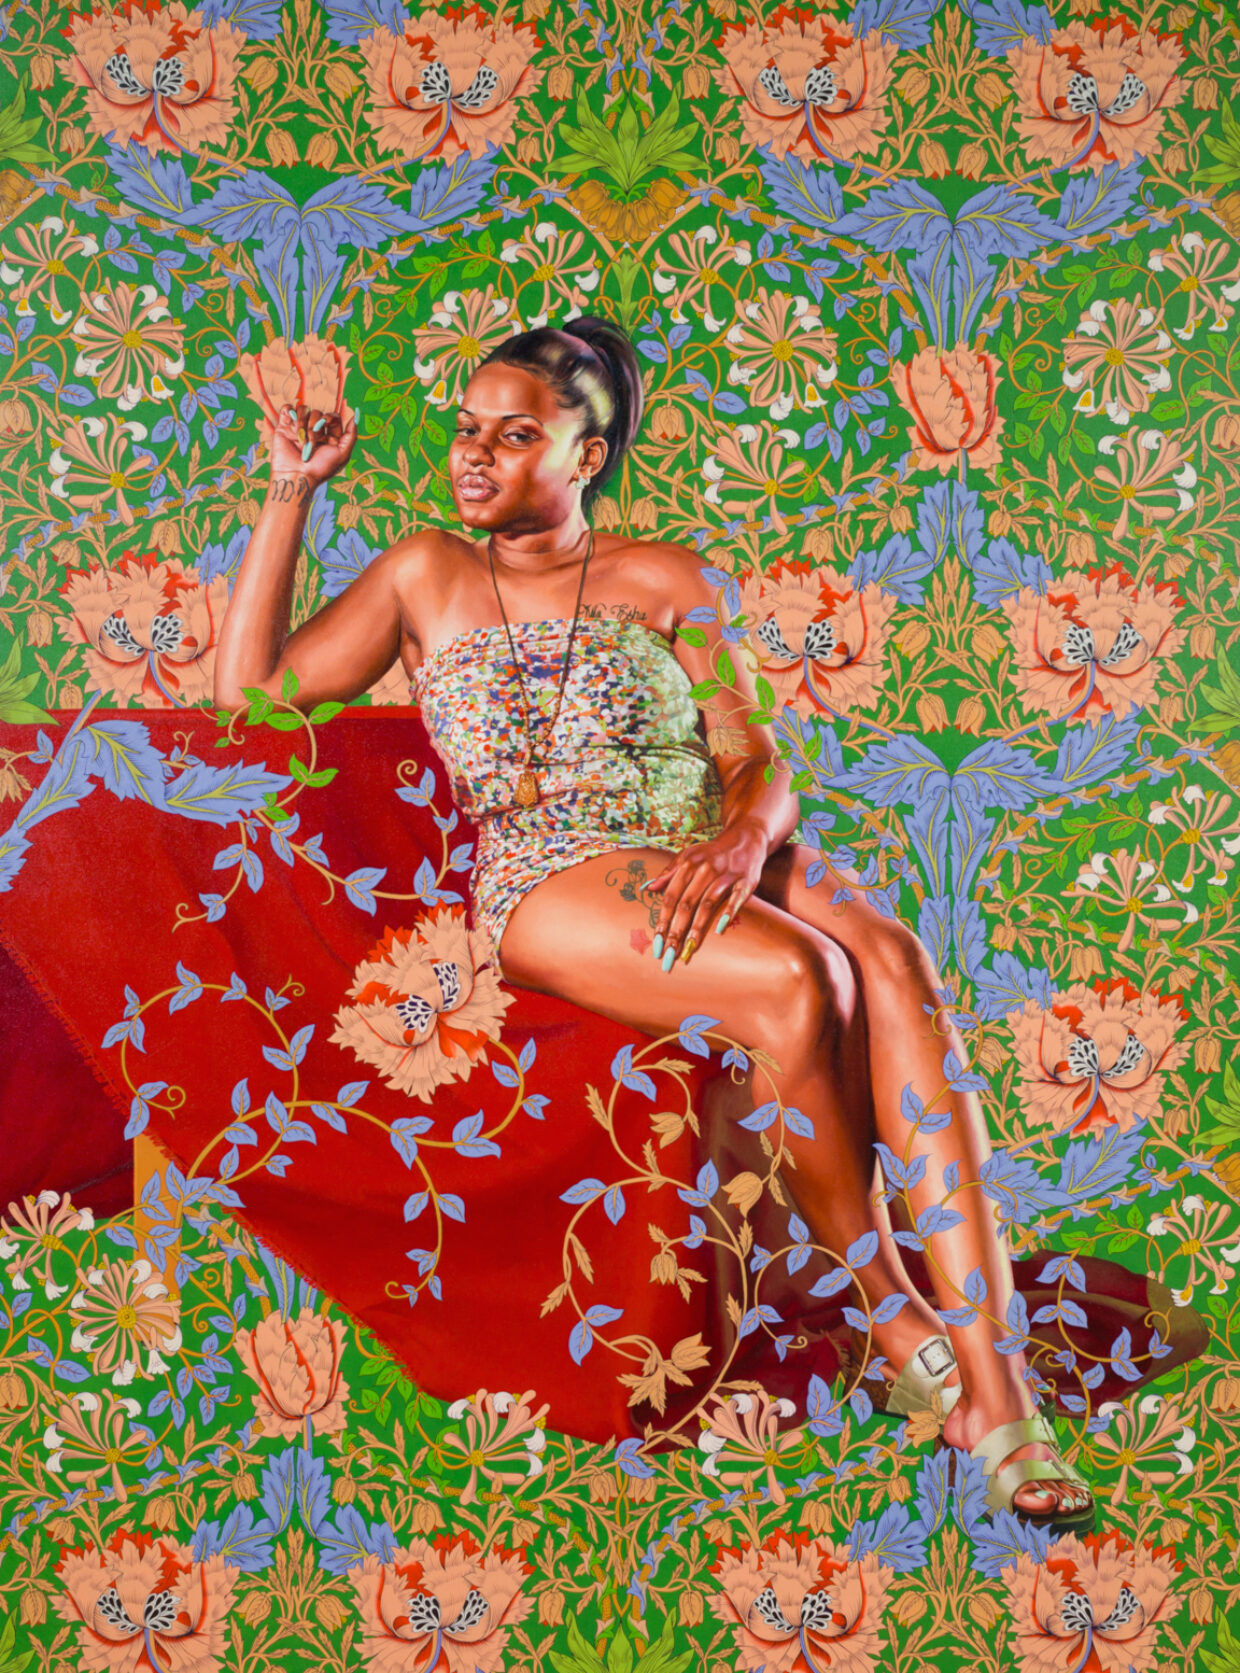 Kehinde Wiley: ‘When I first started painting black women, it was a return home’ | 5